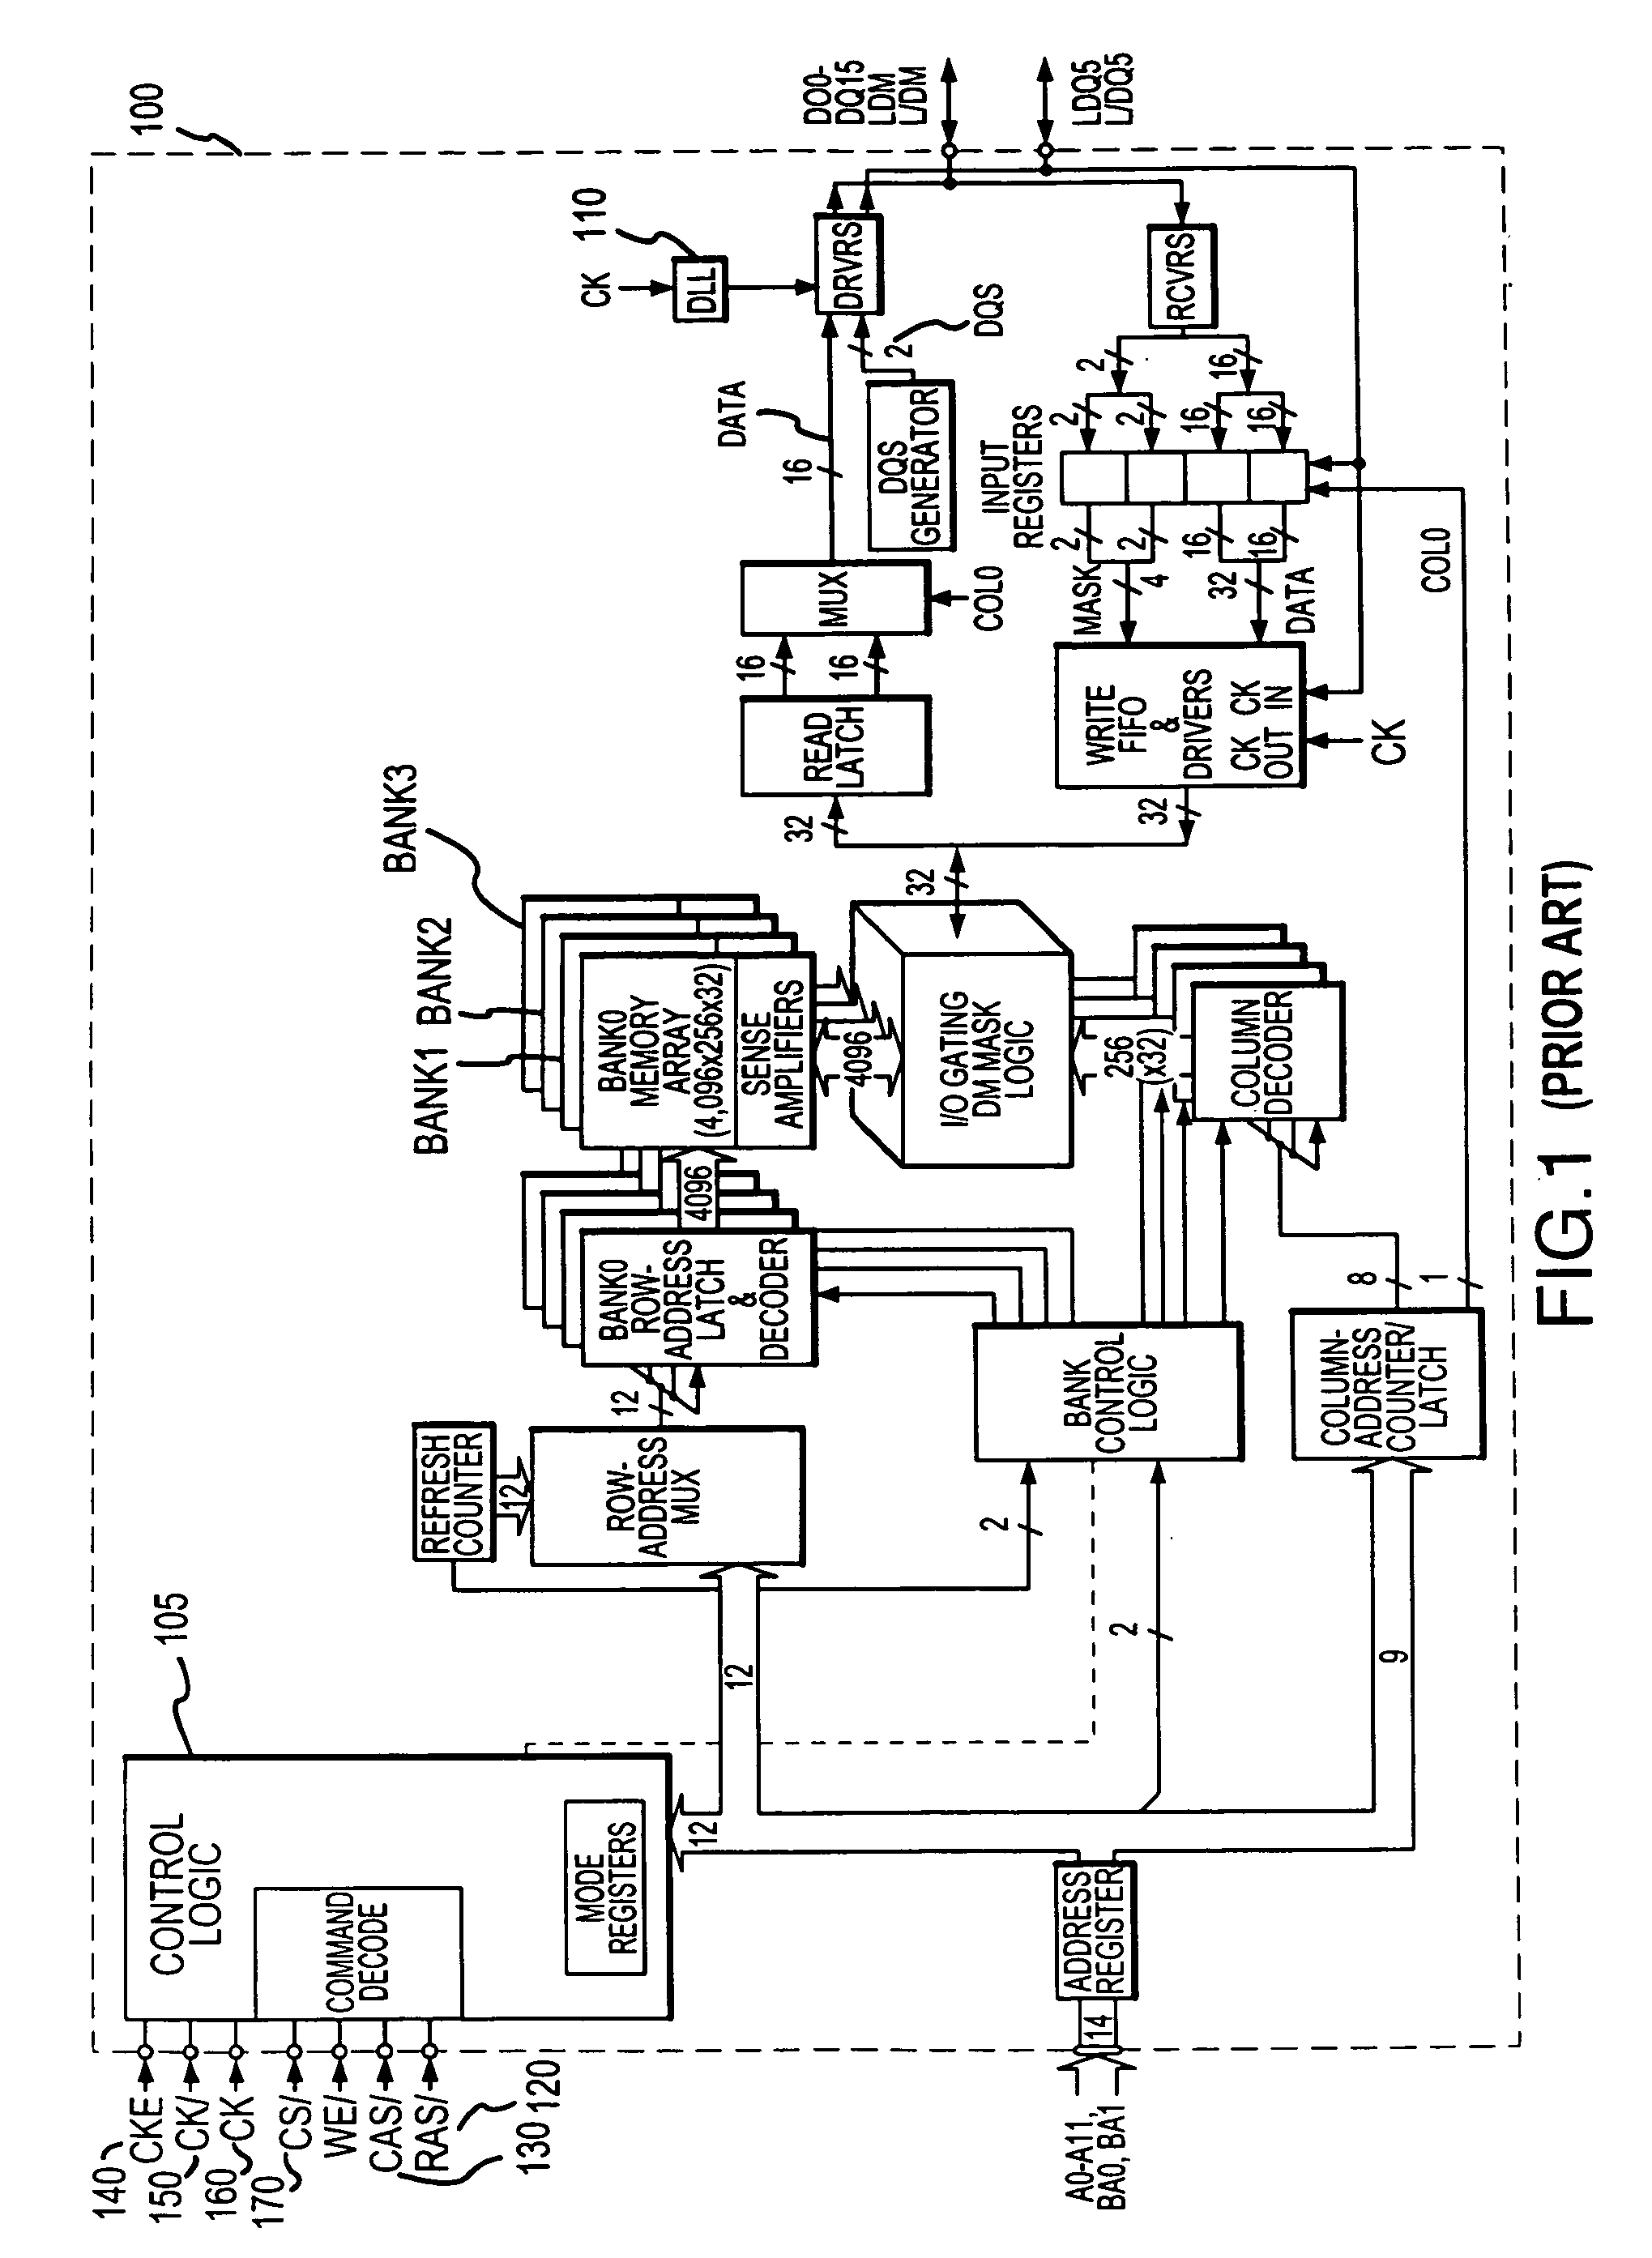 System and method for power saving delay locked loop control by selectively locking delay interval